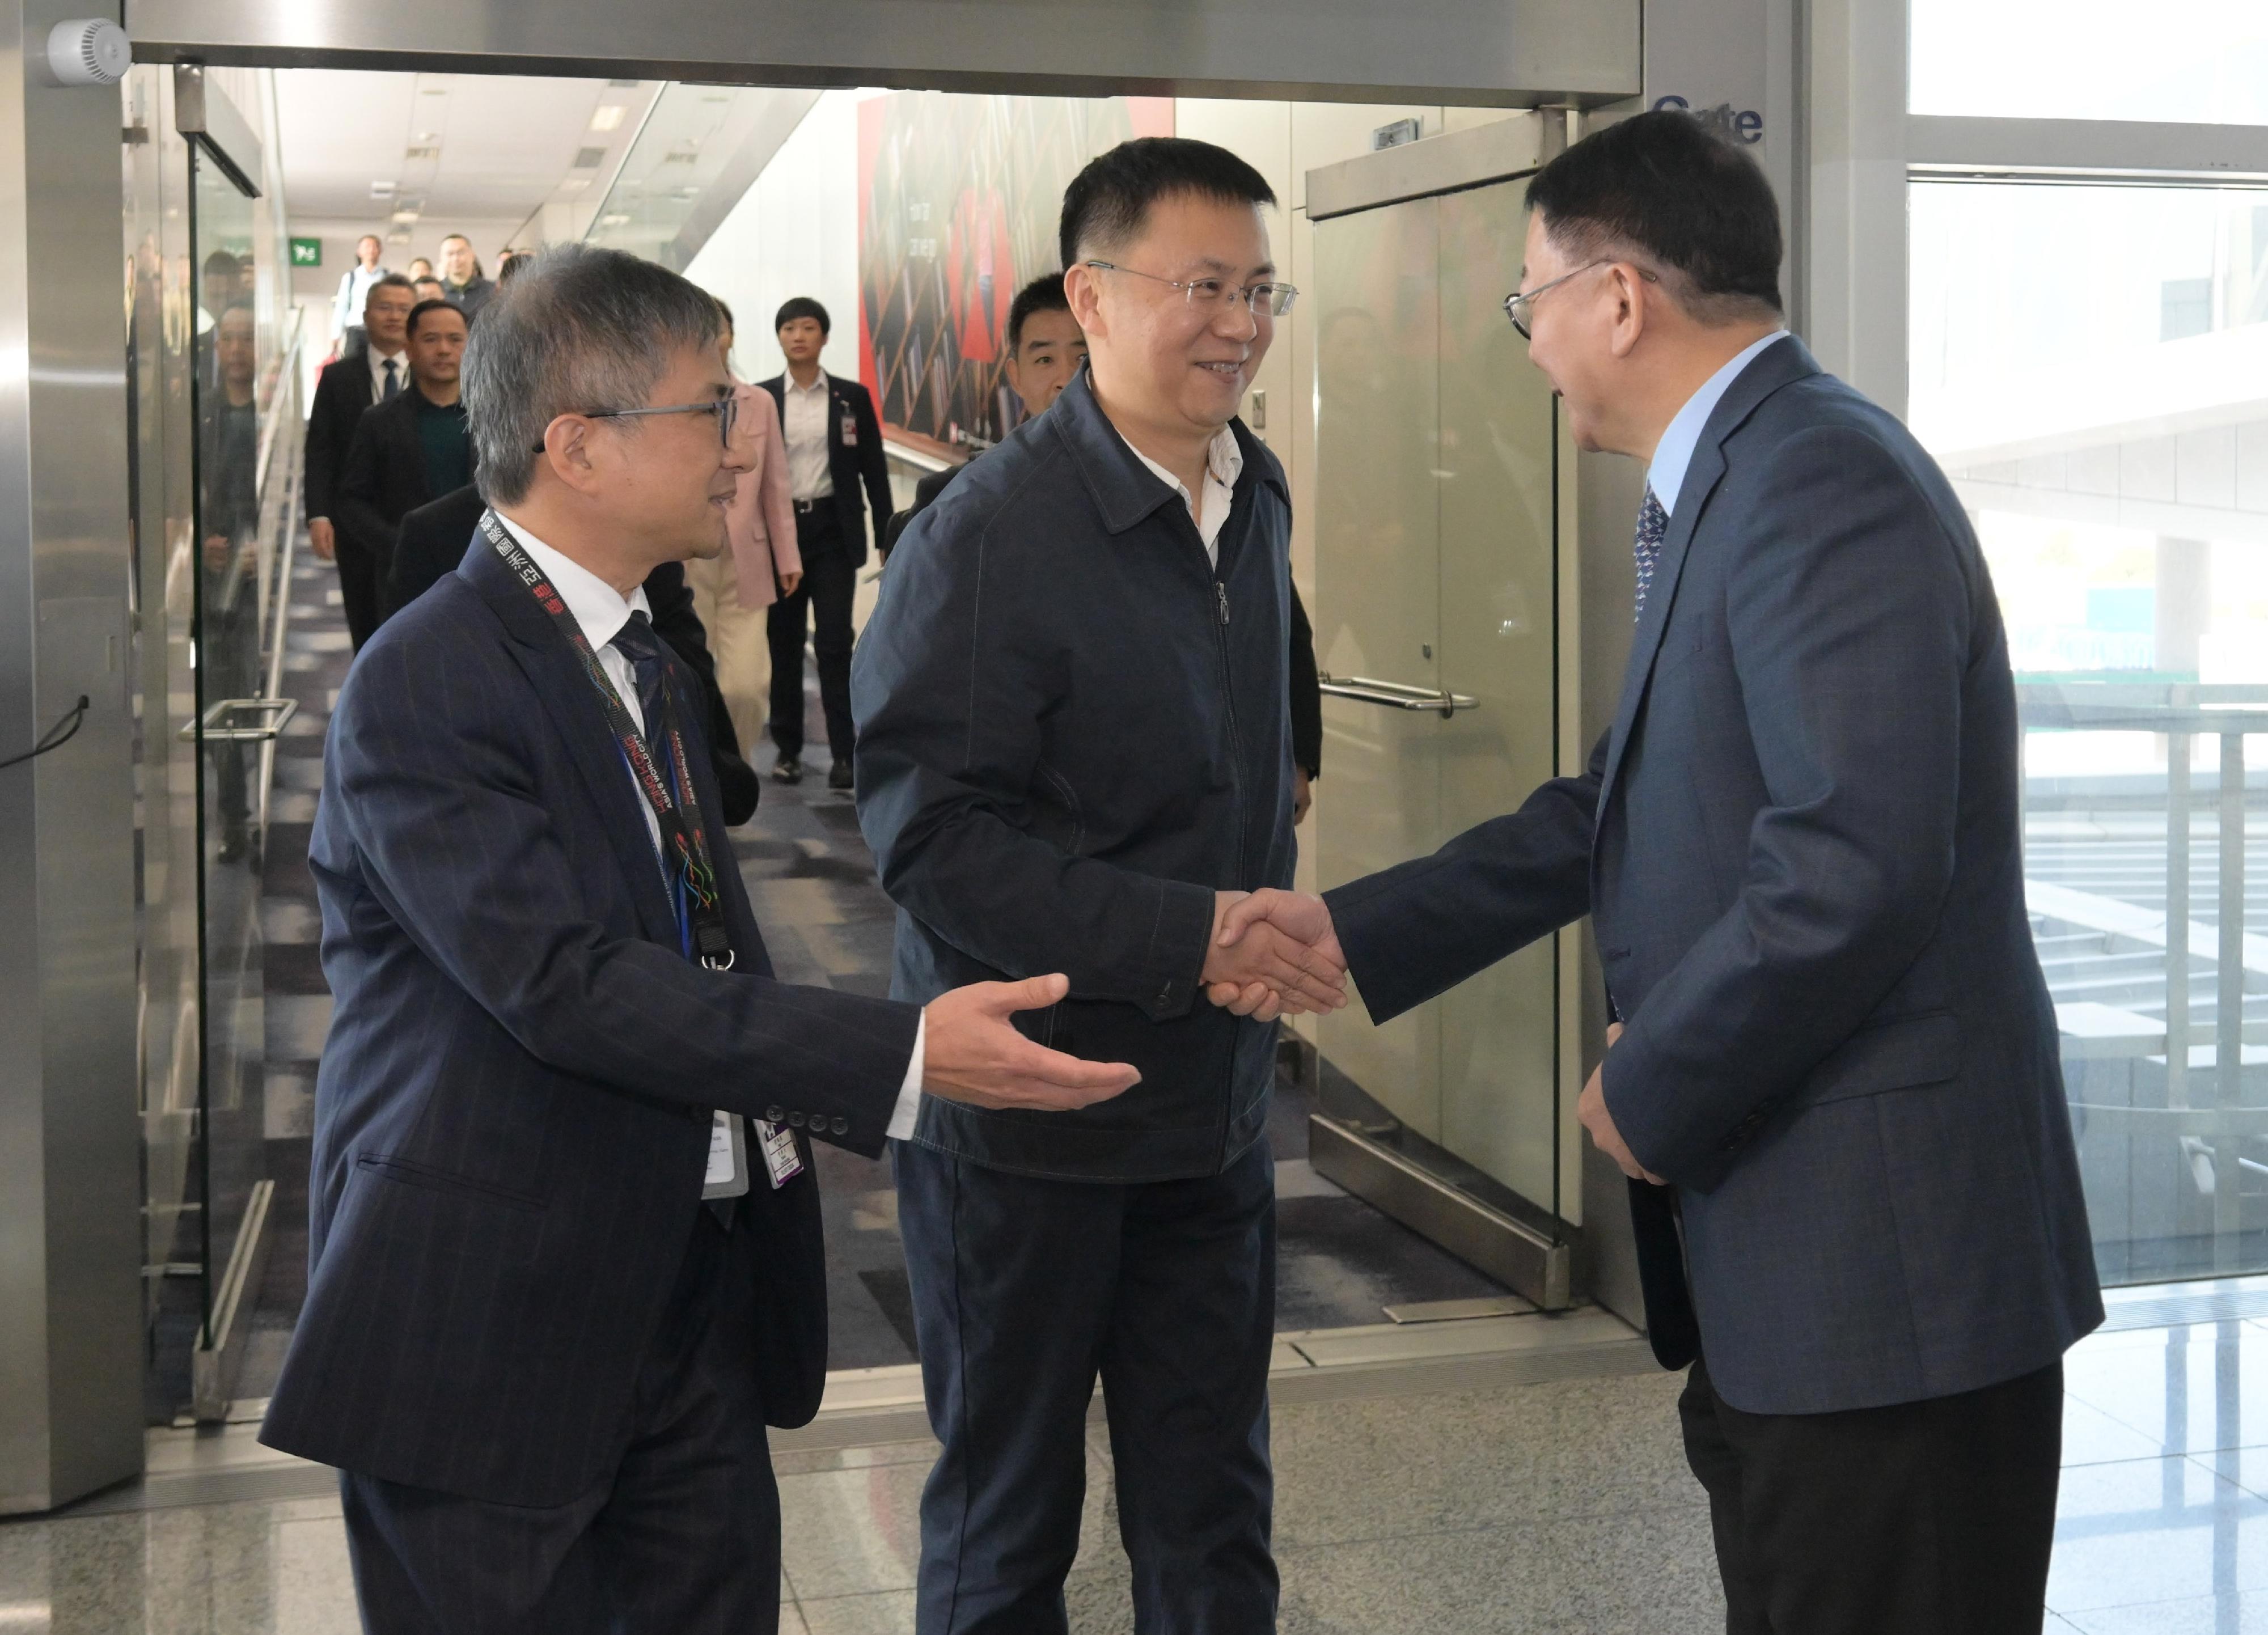 A China Manned Space delegation arrived in Hong Kong for a four-day visit today (November 28). Photo shows the Chief Secretary for Administration, Mr Chan Kwok-ki (right), greeting the leader of the delegation and the Deputy Director General of the China Manned Space Agency, Mr Lin Xiqiang (centre), on arrival at Hong Kong International Airport.